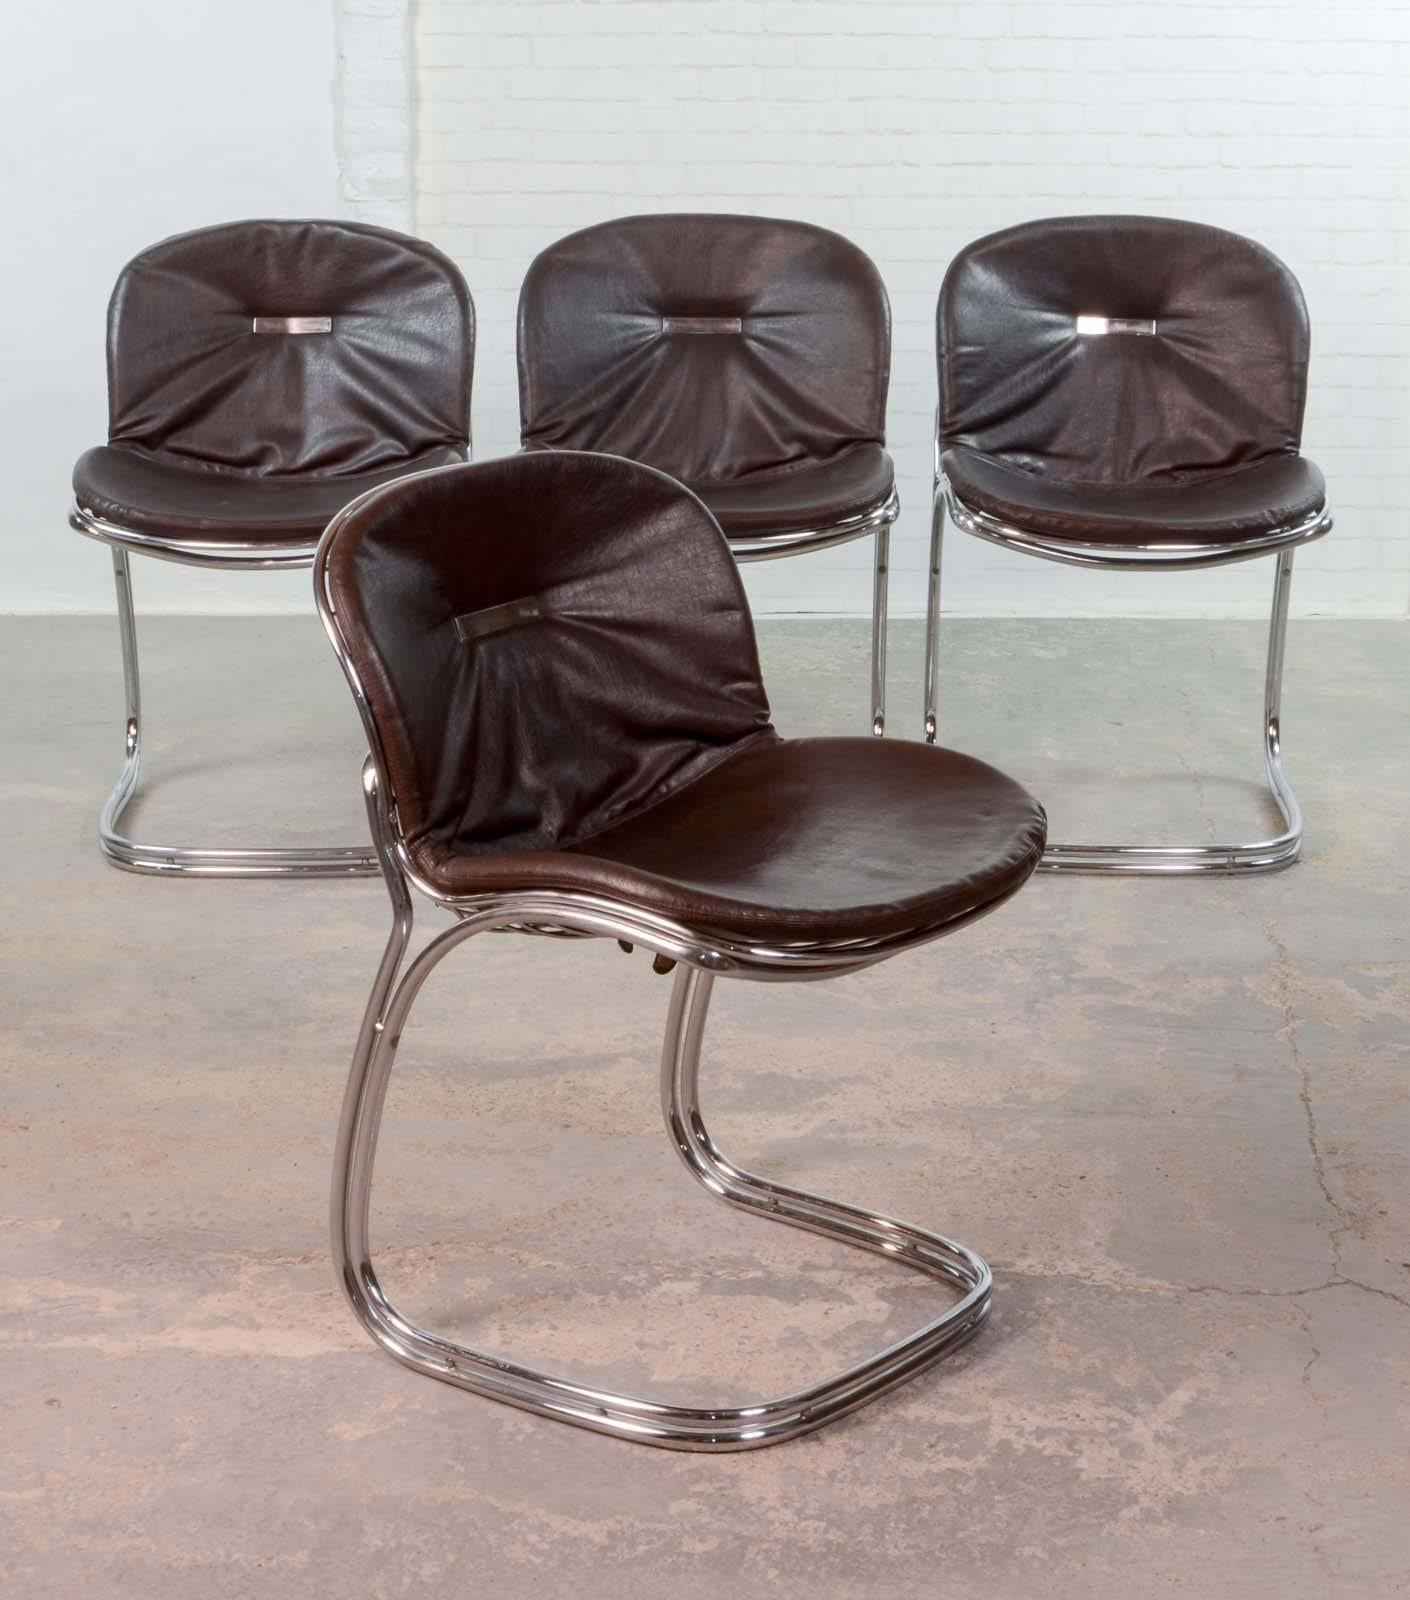 This set of four 'Sabrina' chrome steel wire chairs were designed by Gastone Rinaldi for RIMA in Padove, Italy, during the 1970s. The cantilevered chairs feature chromed tubular steel frames and cushions covered with dark brown leatherette,